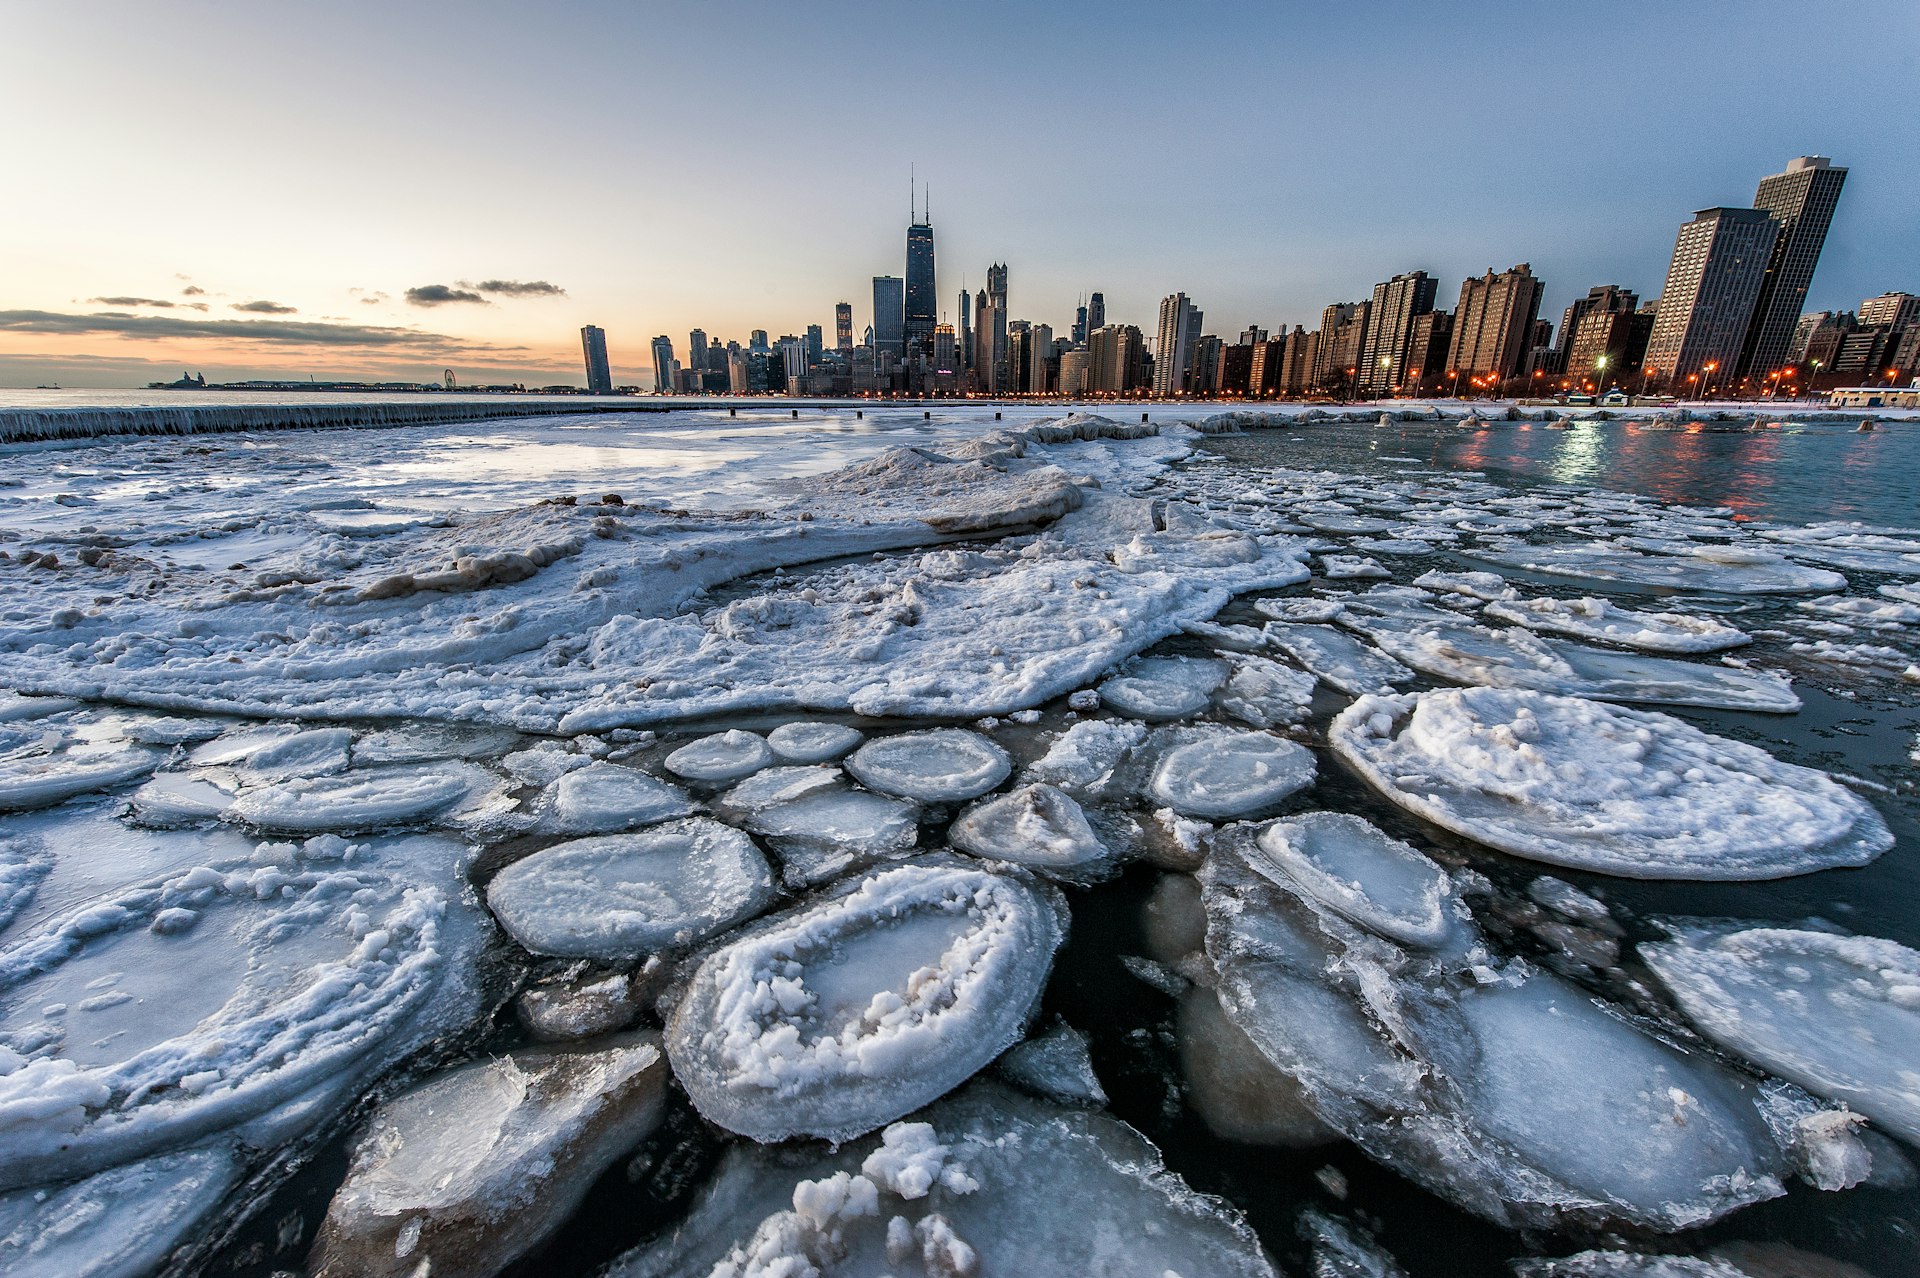 Ice on a lake with a big city skyline with tall skyscrapers in the background